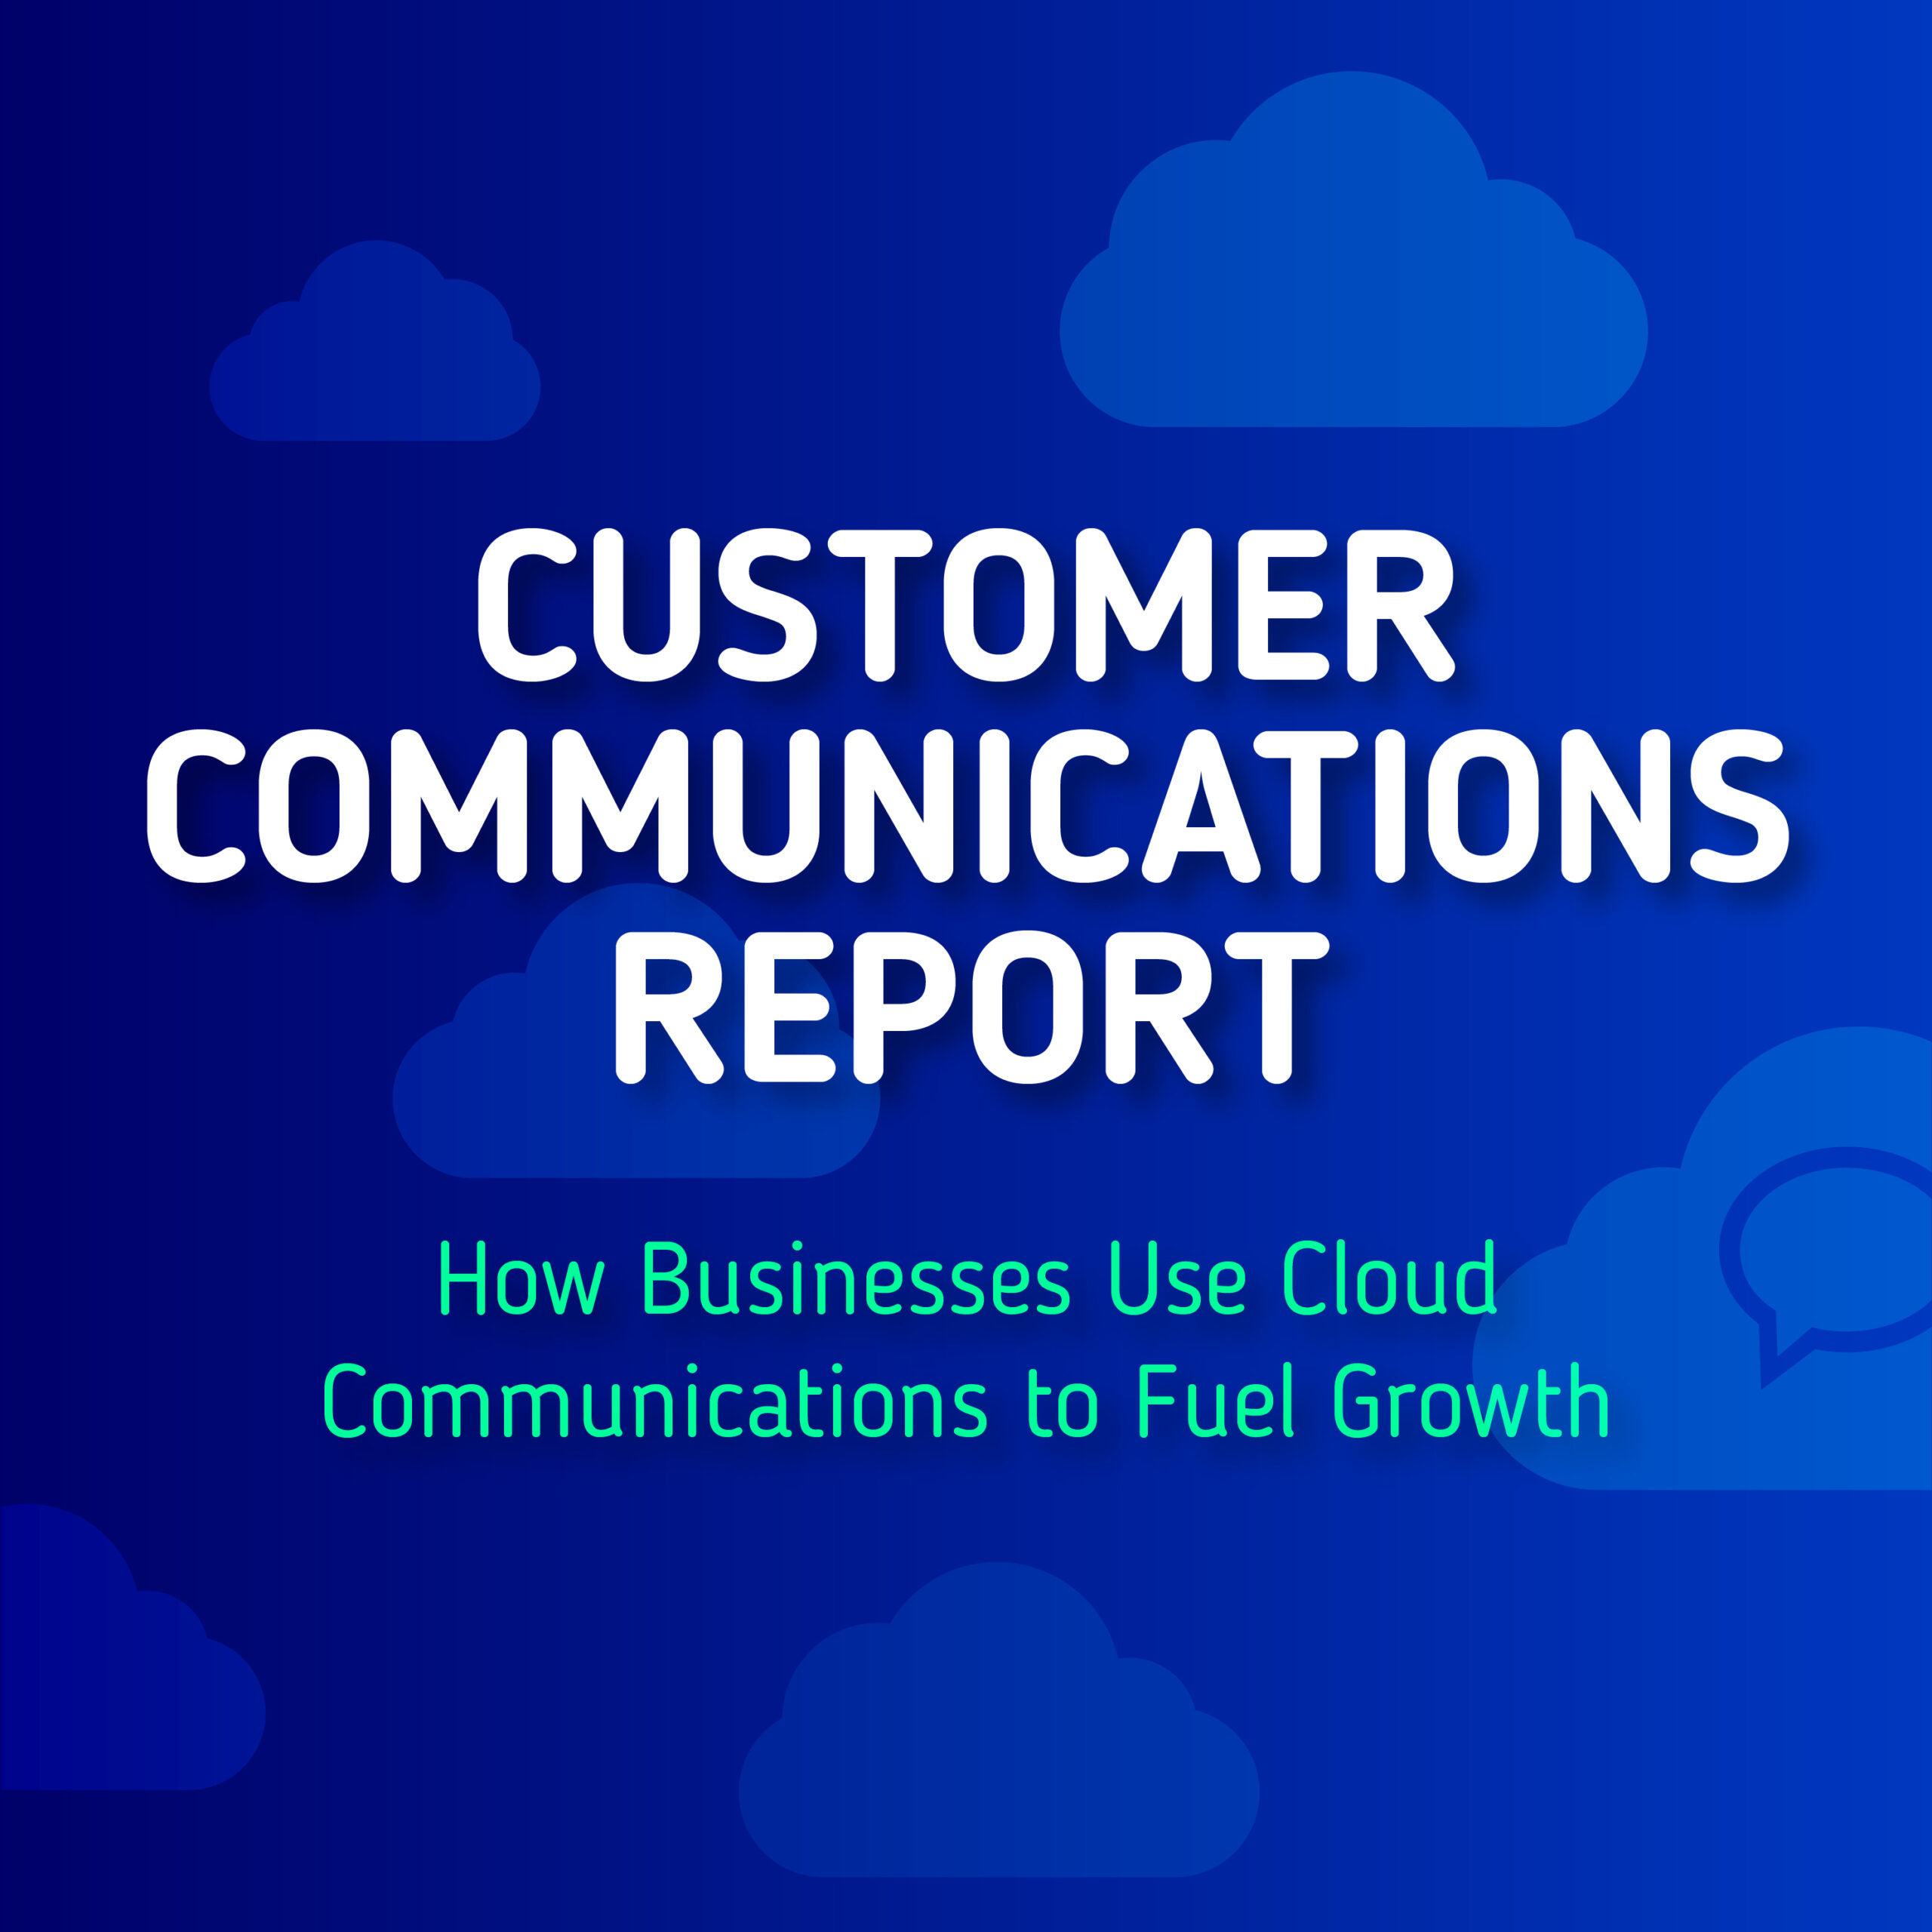 How Businesses Use Cloud Communications to Fuel Growth